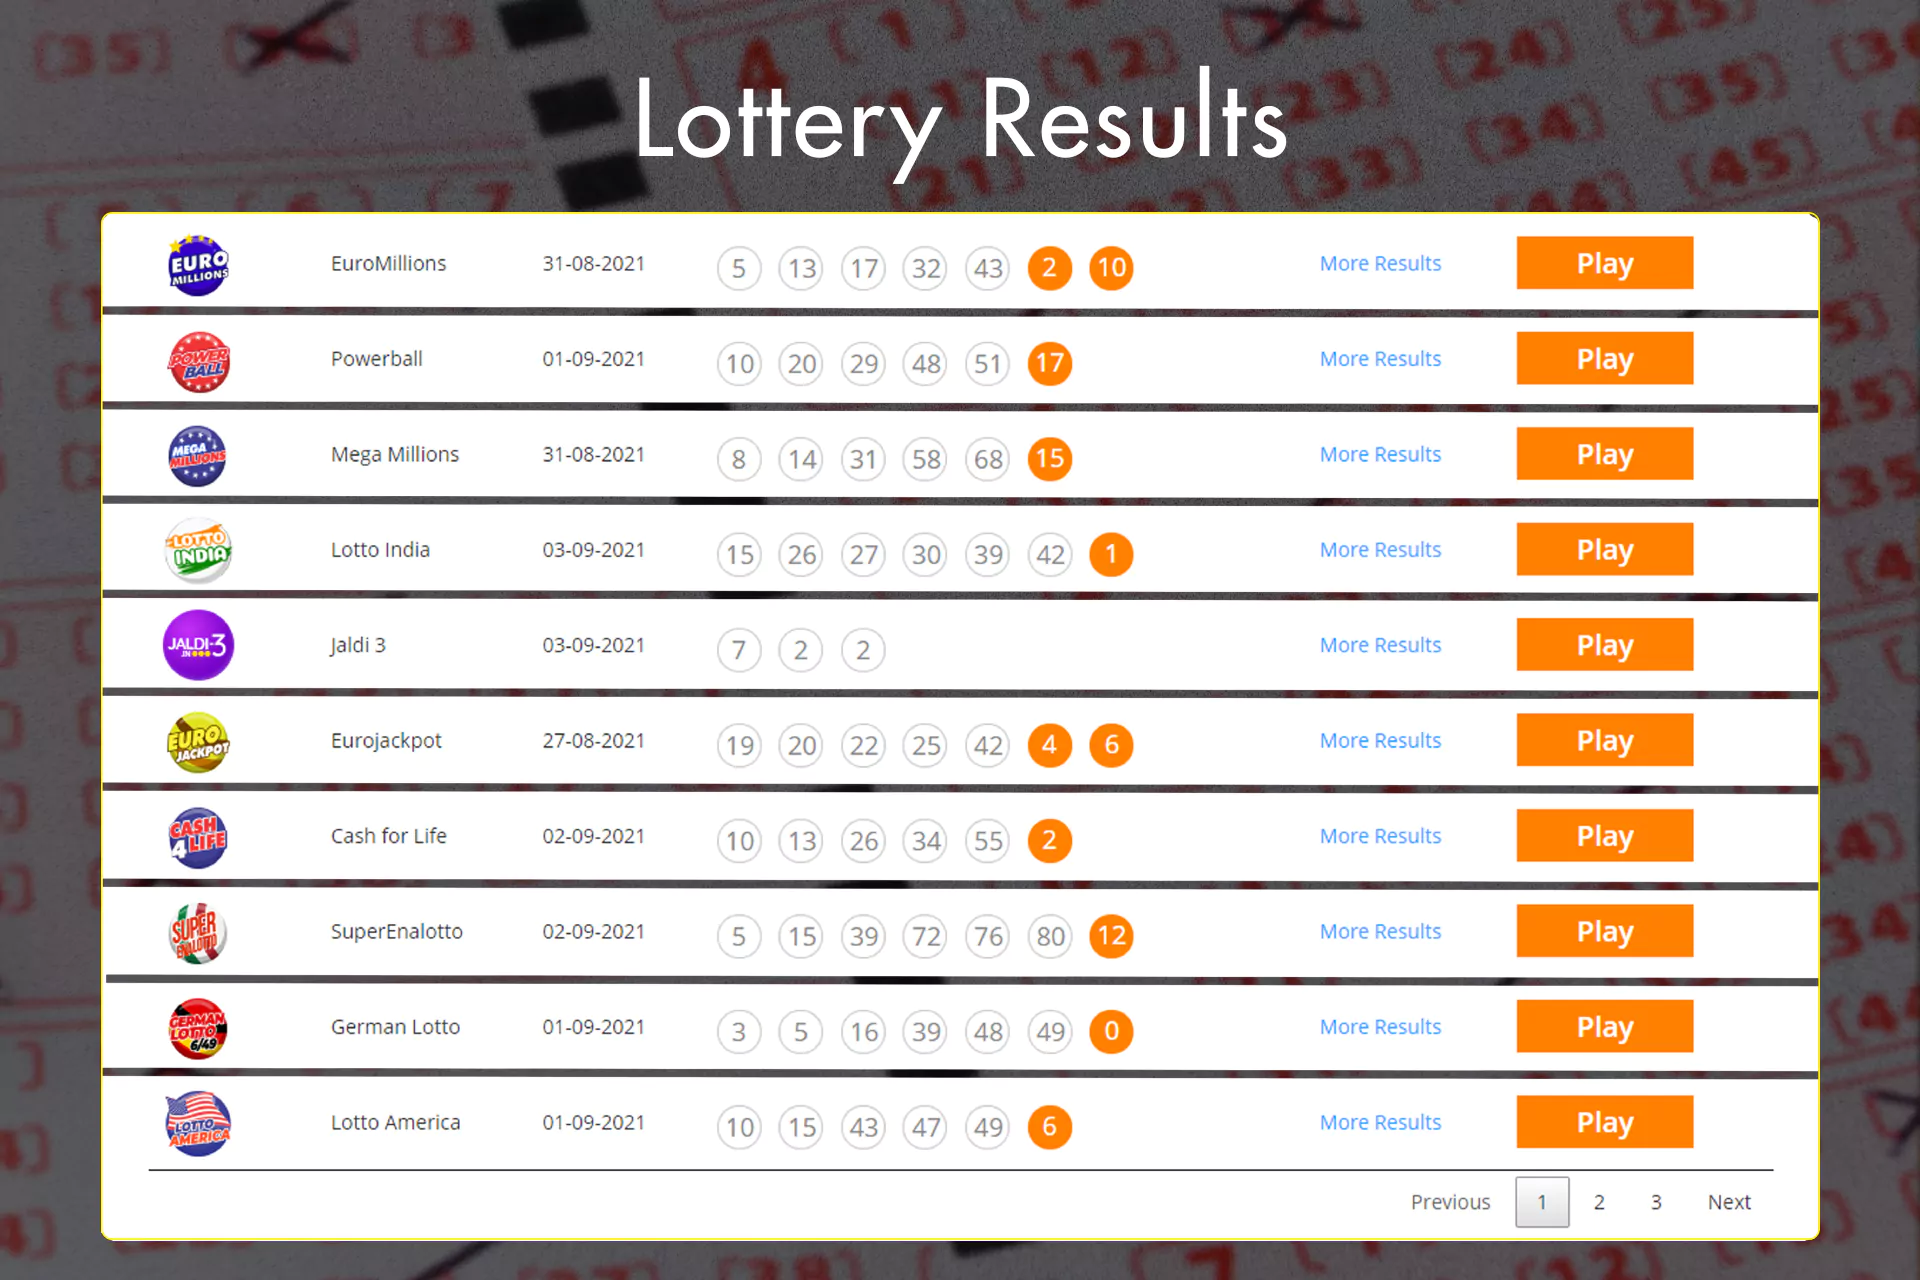 After taking part in lotteries don't forget to check the results.